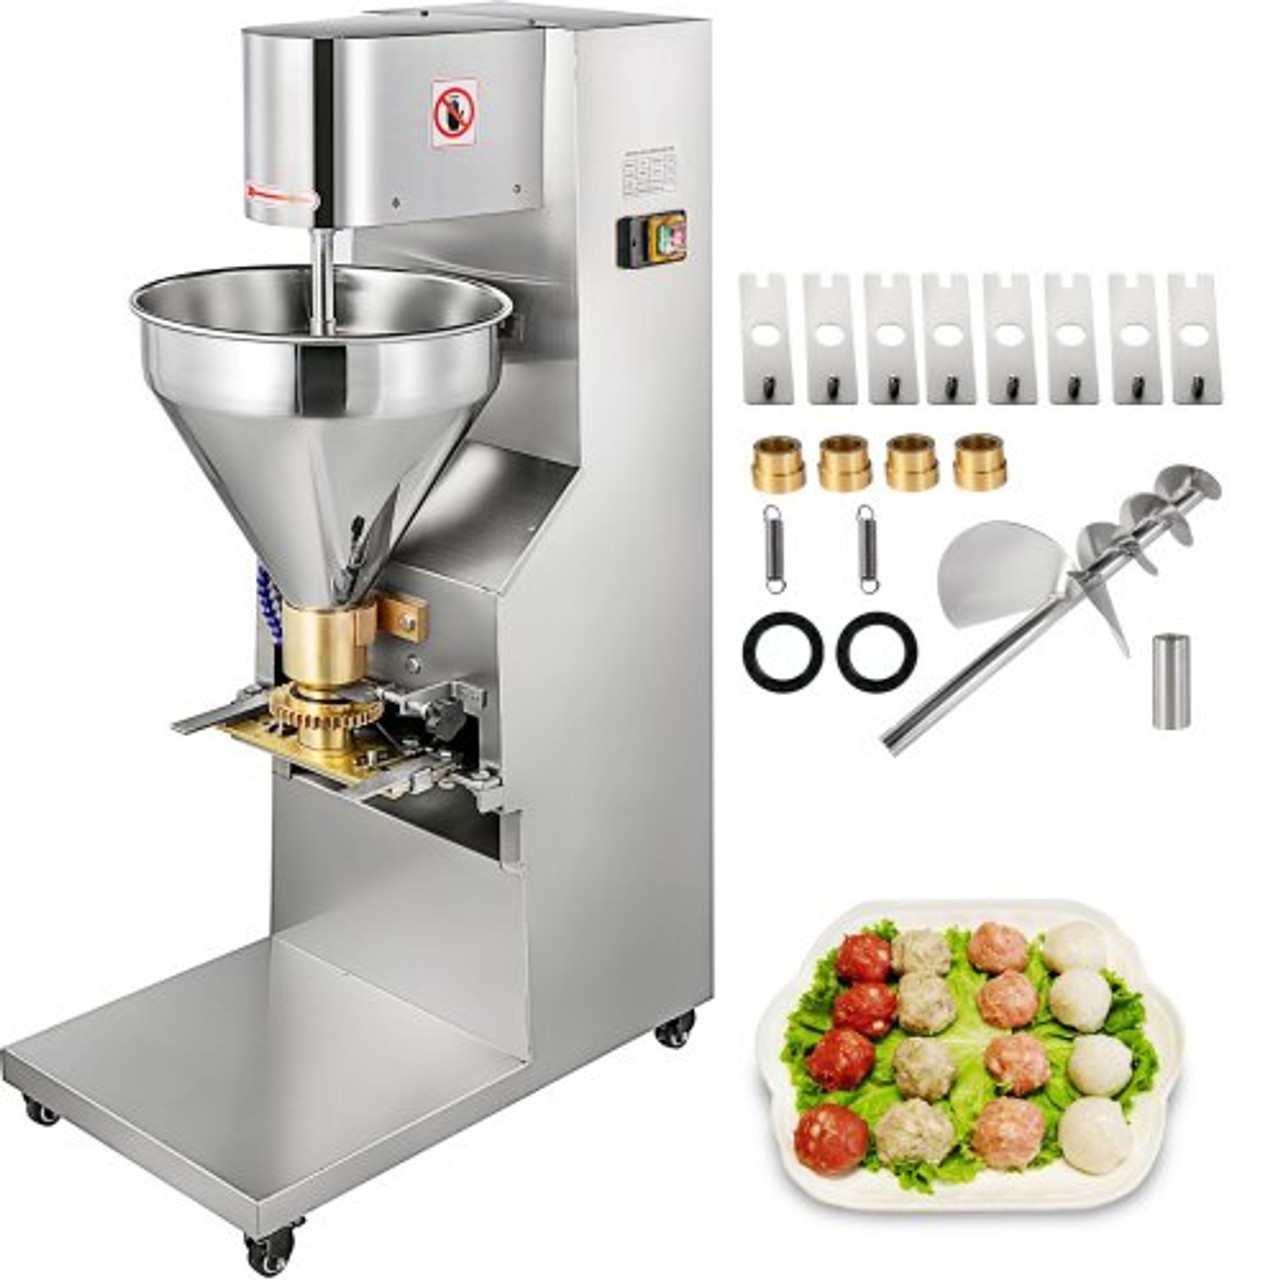 Commercial Meatball Forming Machine, 280 PCs/min Meatball Maker Machine, 1100W Electric Fish Beef Pork Ball Making Tool with 18/20/22/26/30 mm Models, Stainless Stee